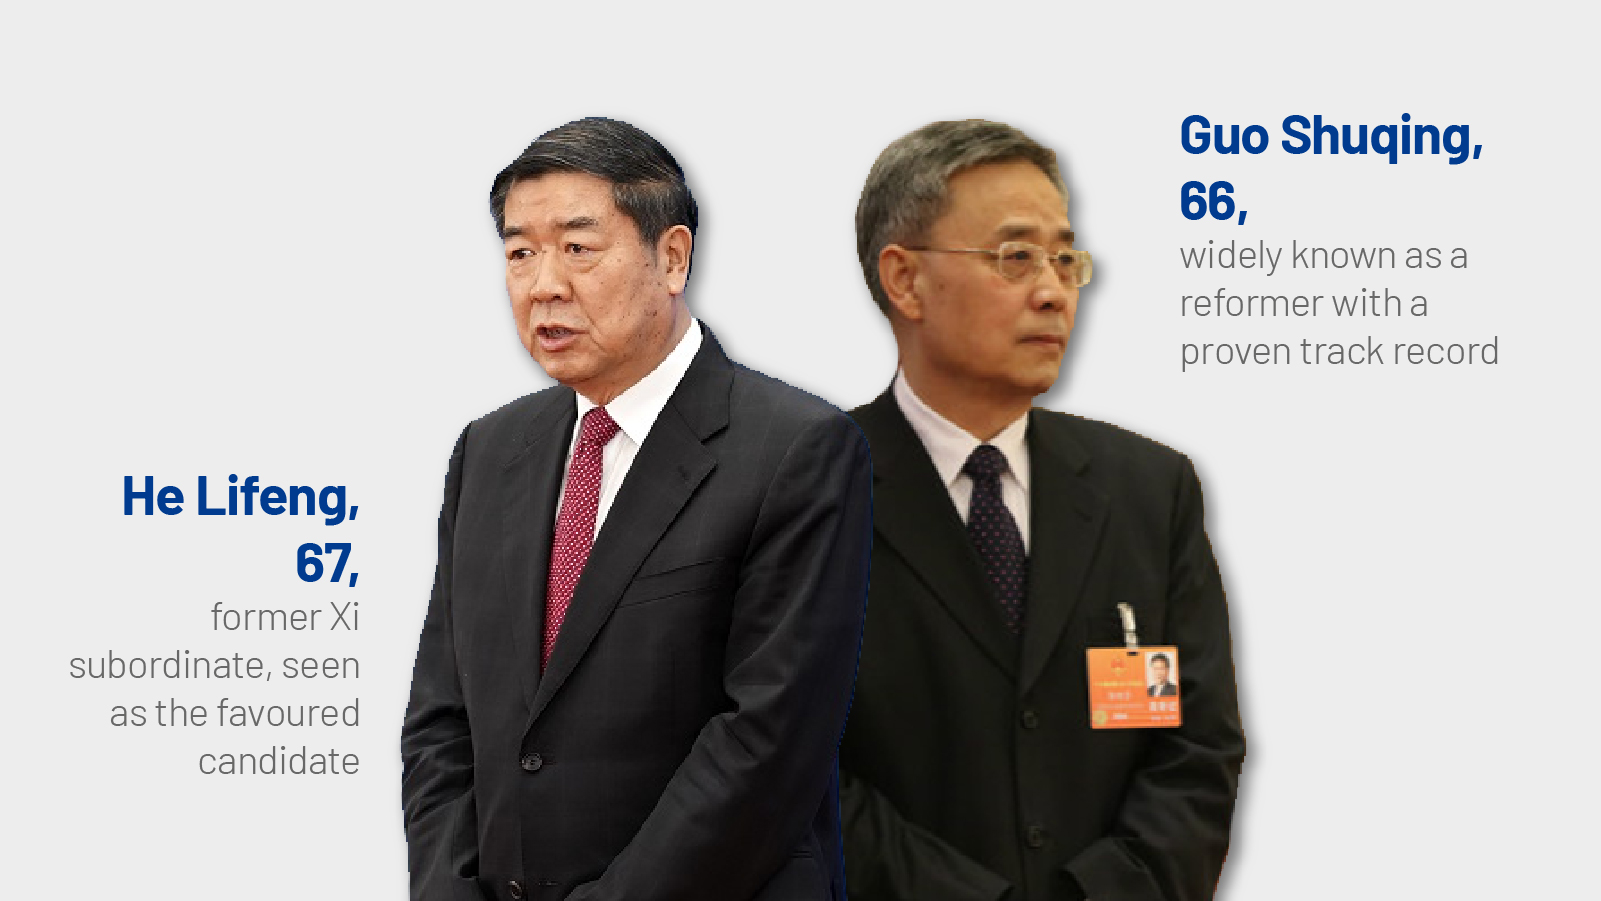 The rumour mill has seized on two names - He Lifeng and Guo Shuqing - amid the fog of obscurity that marks high-level Chinese politics. Graphic: Aarushi Agrawal